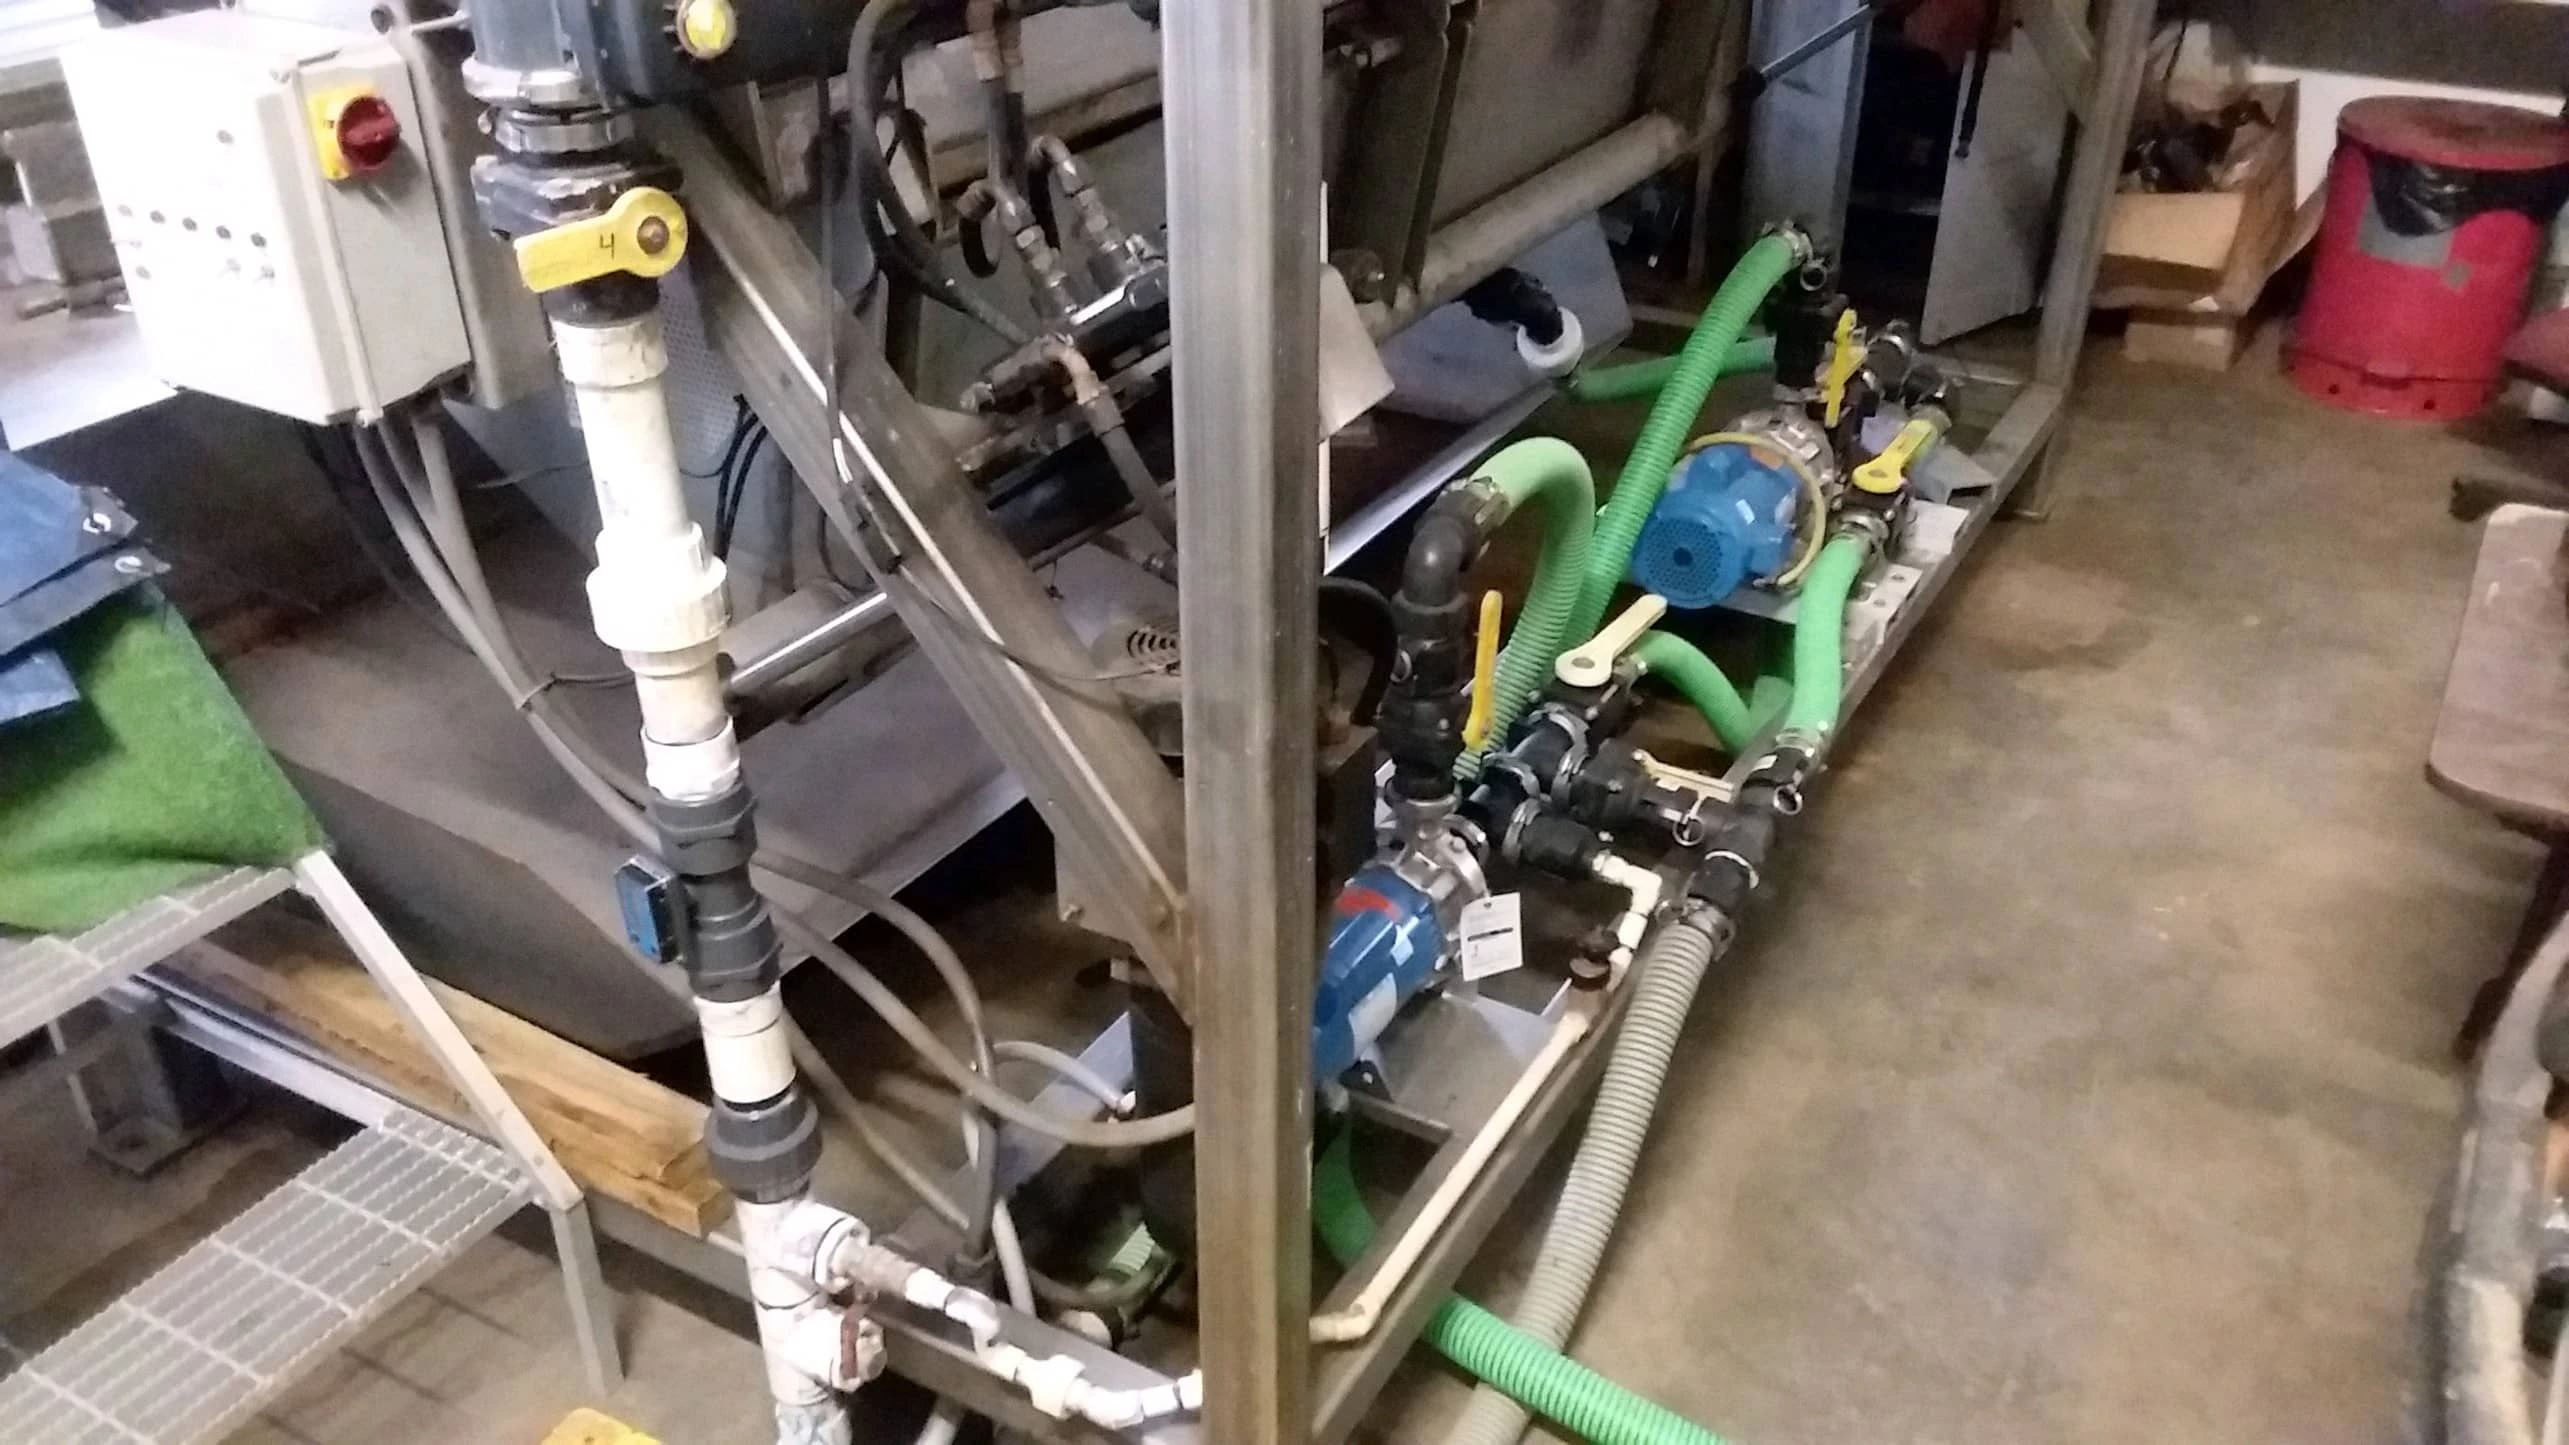 A mock brine shop assembly area shows pump hoses, valves, and piping used in diagnosing pump malfunctions.